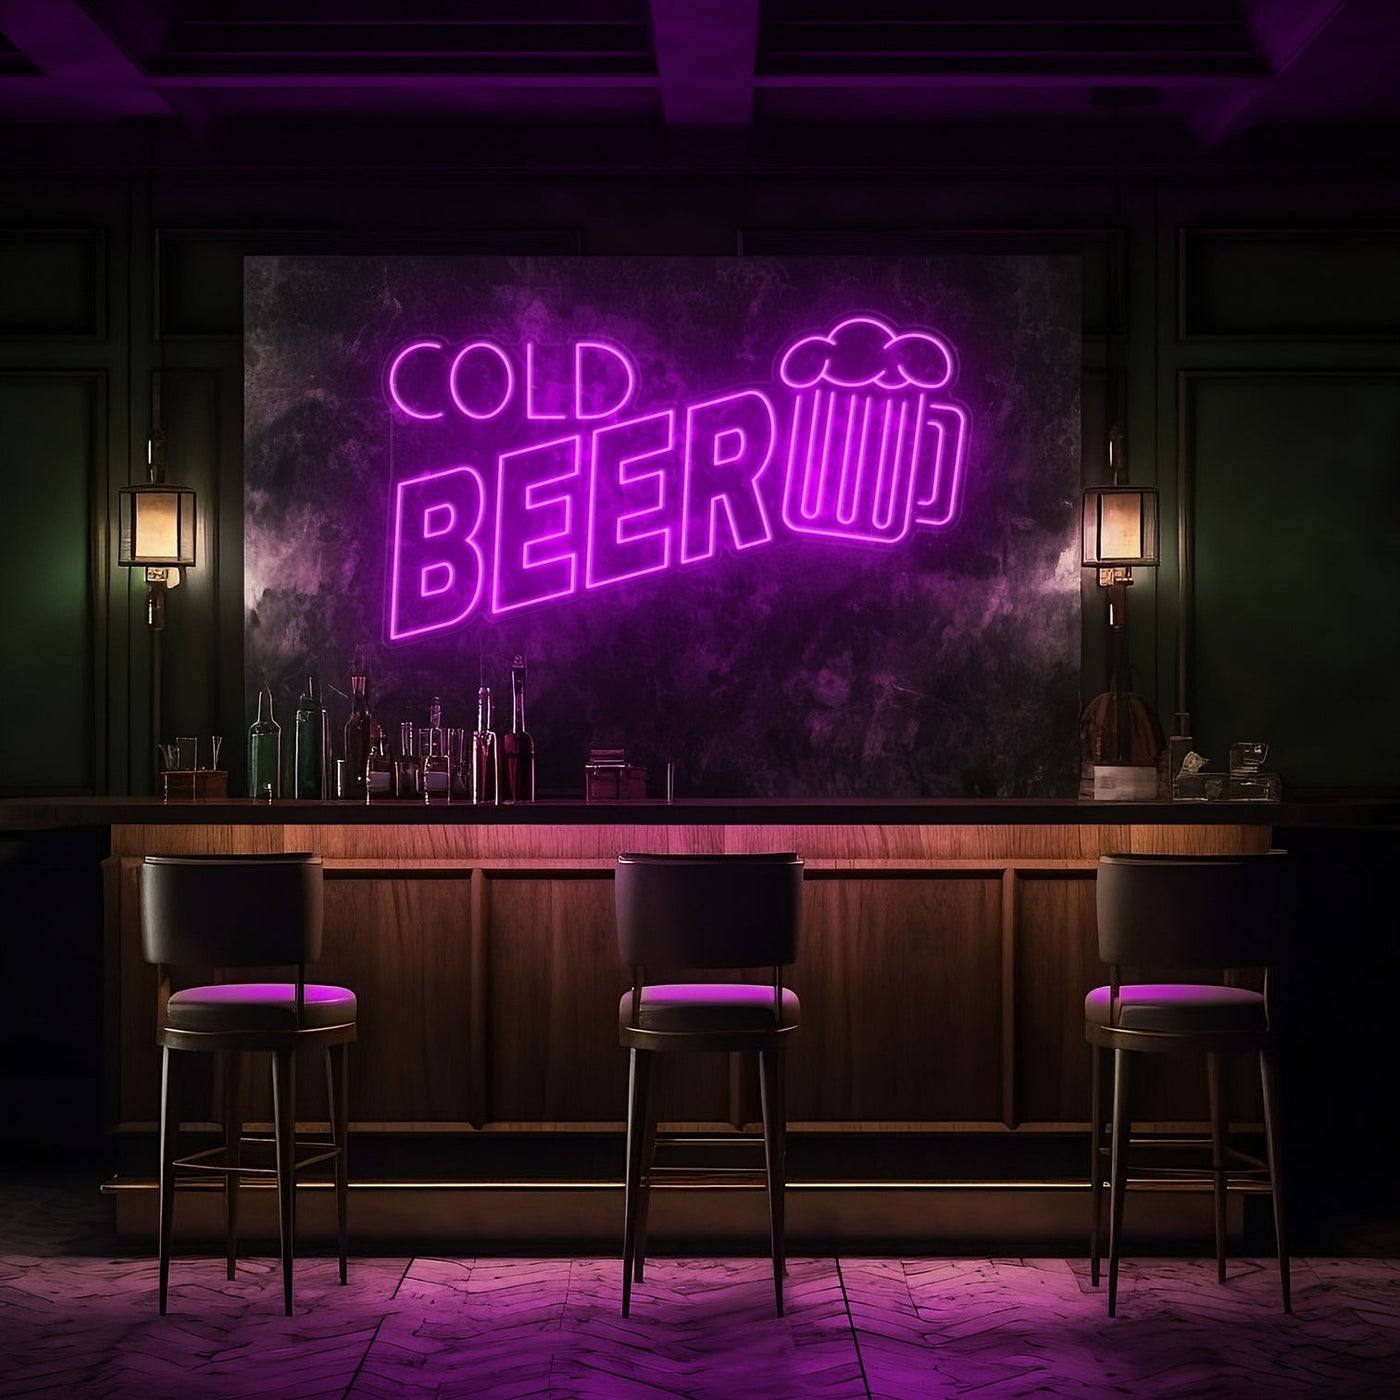 Cold Beer Bar LED Neon Sign - 30 InchGolden Yellow